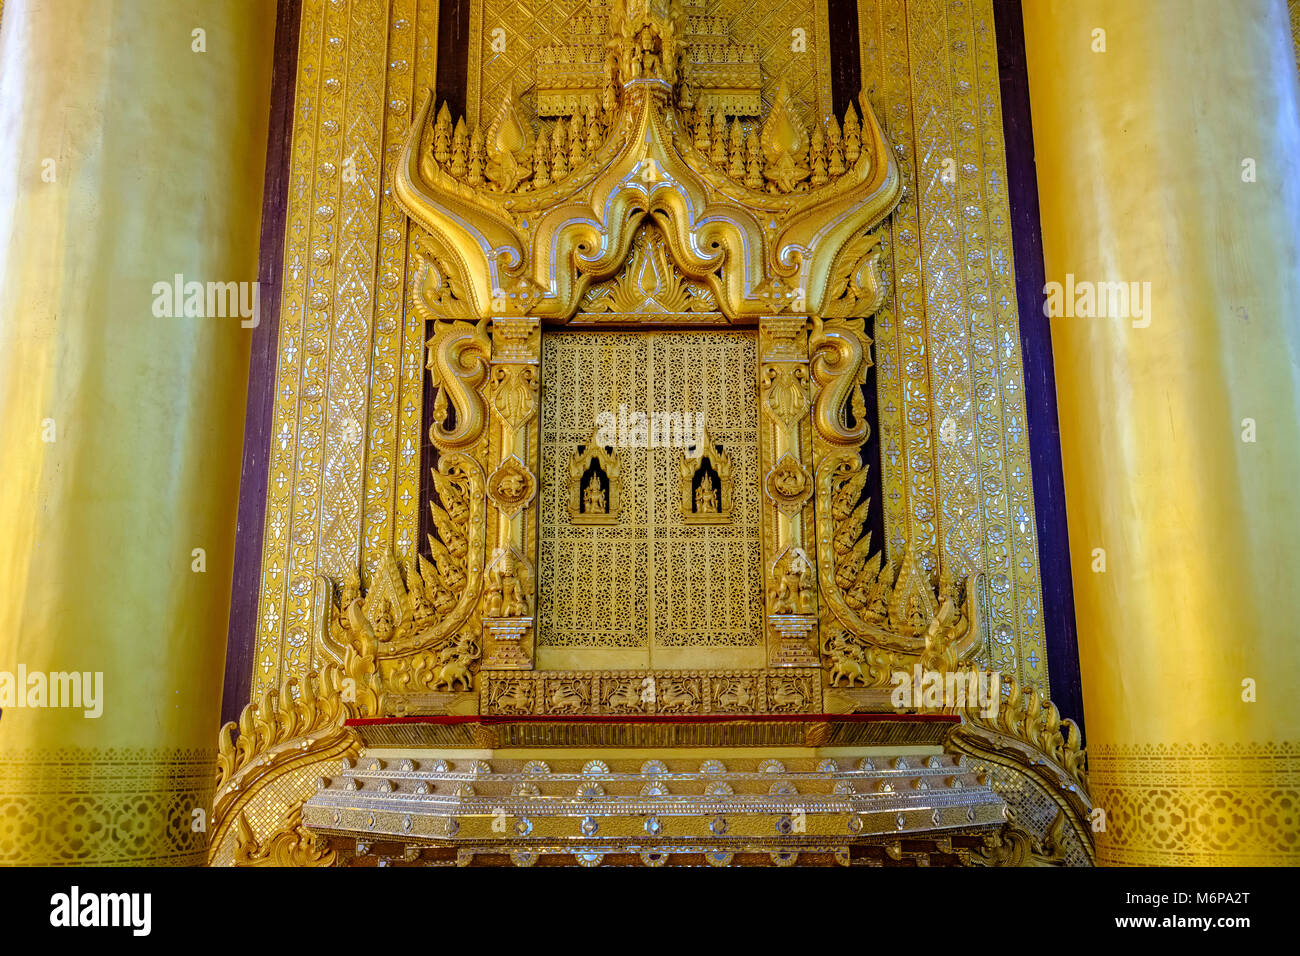 The Thihathana Throne, Lion Throne, situated inside the Royal Lion Throne Hall of the Kanbawzathadi Golden Palace Stock Photo